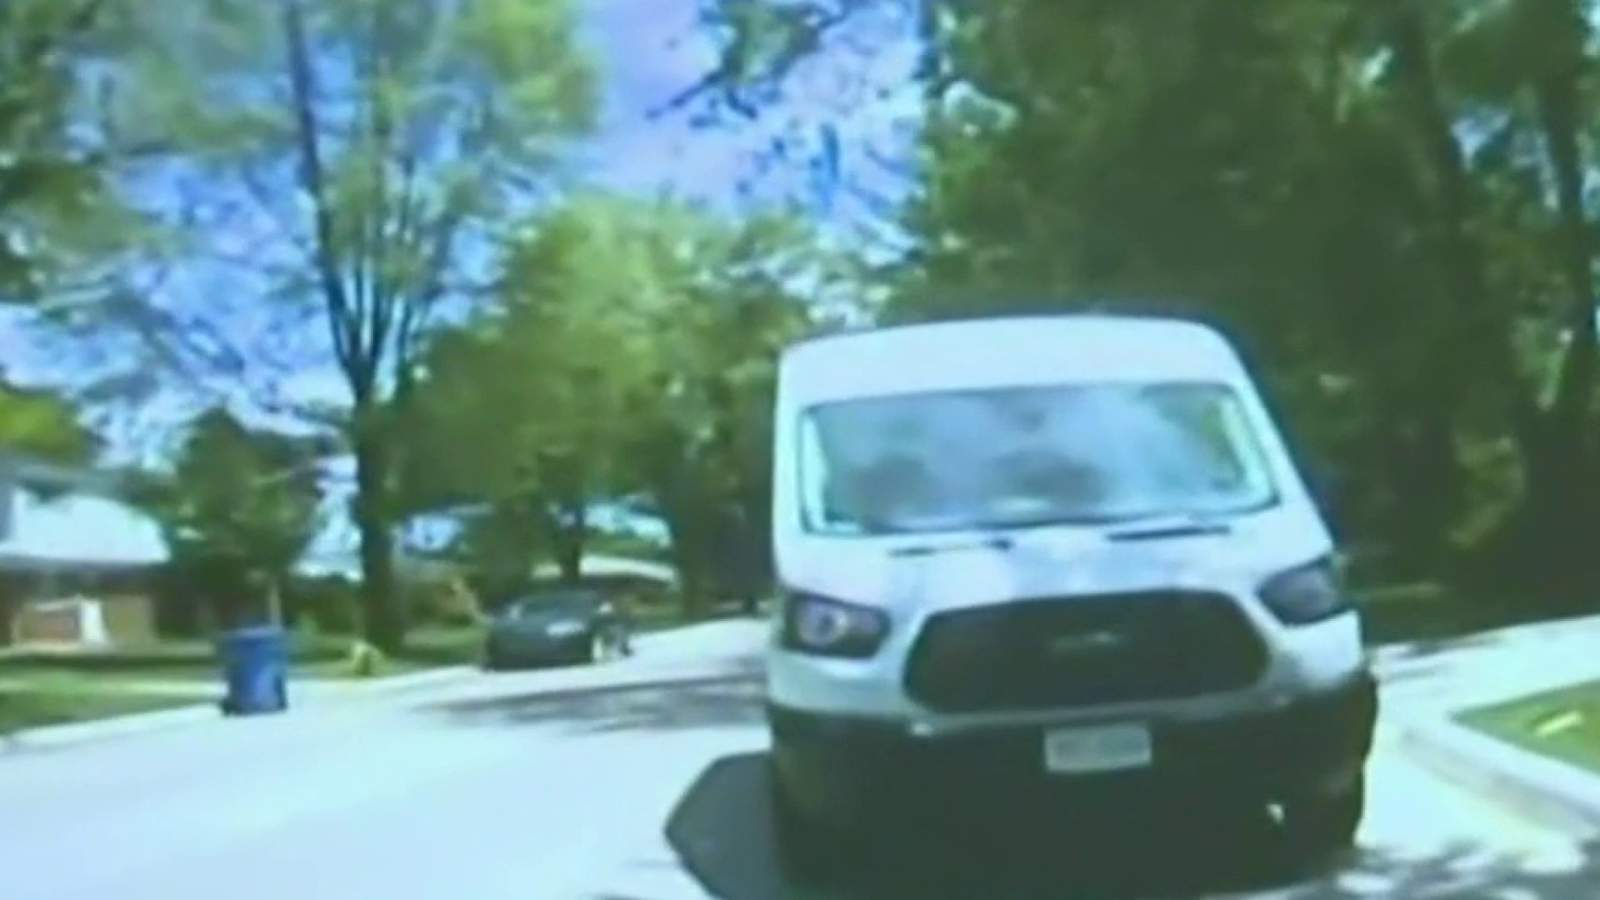 County sheriff: White Warren police officer did not violate laws during arrest of Black Amazon driver